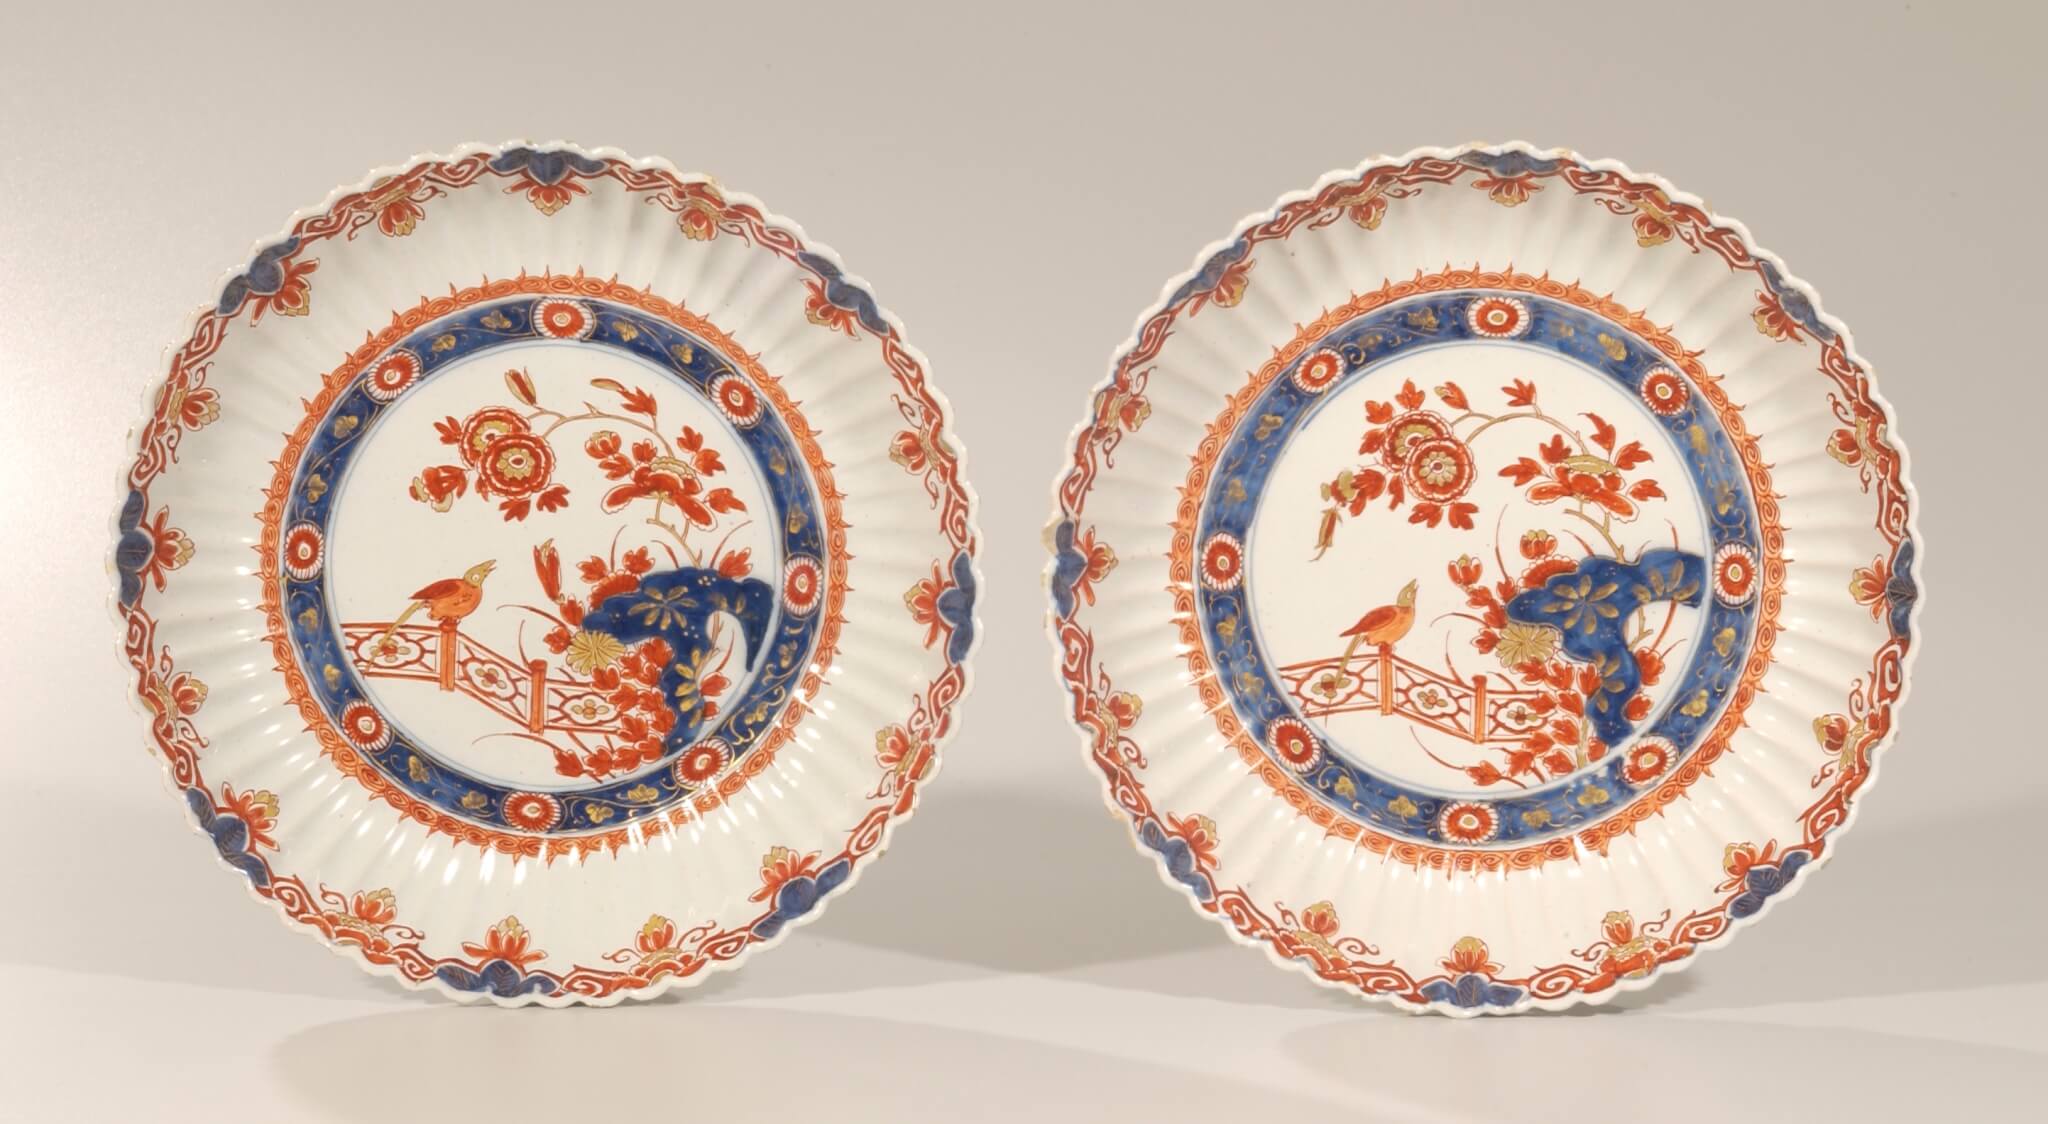 Polychrome dishes